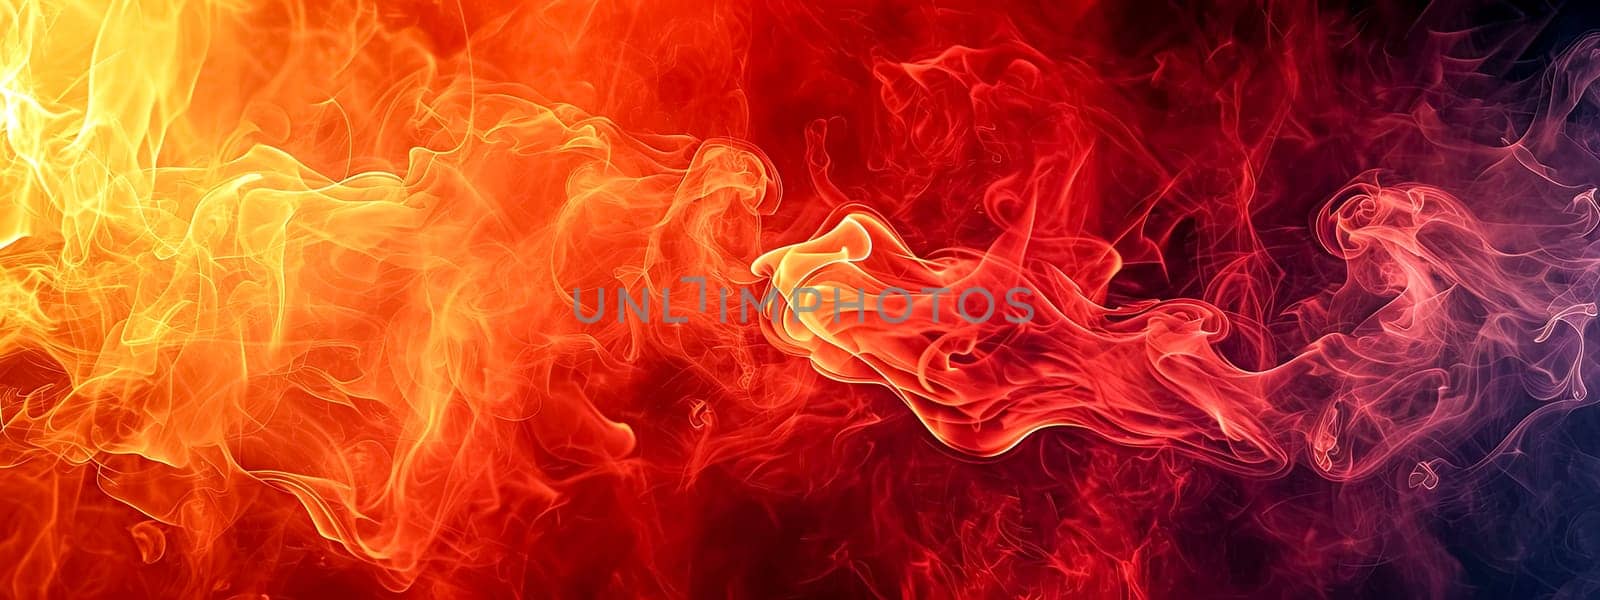 flames and smoke in red and orange hues on a gradient background, ideal for a fiery concept with ample space for text